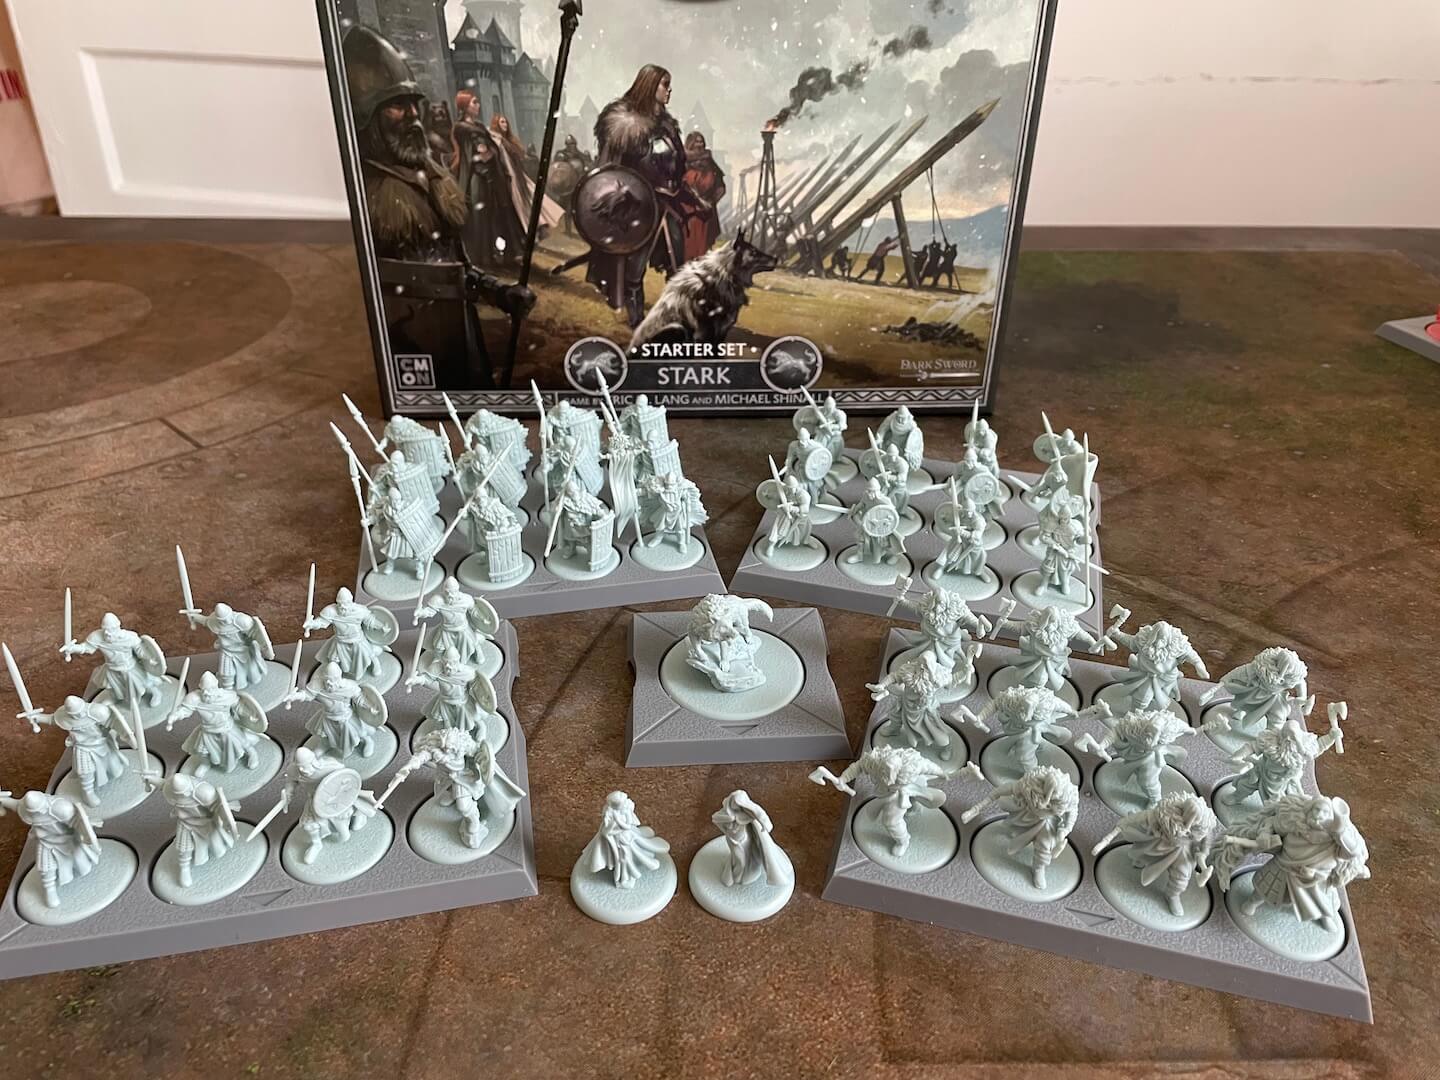 The miniatures found in the Stark Starter Set for A Song Of Ice And Fire Tabletop Miniatures Game